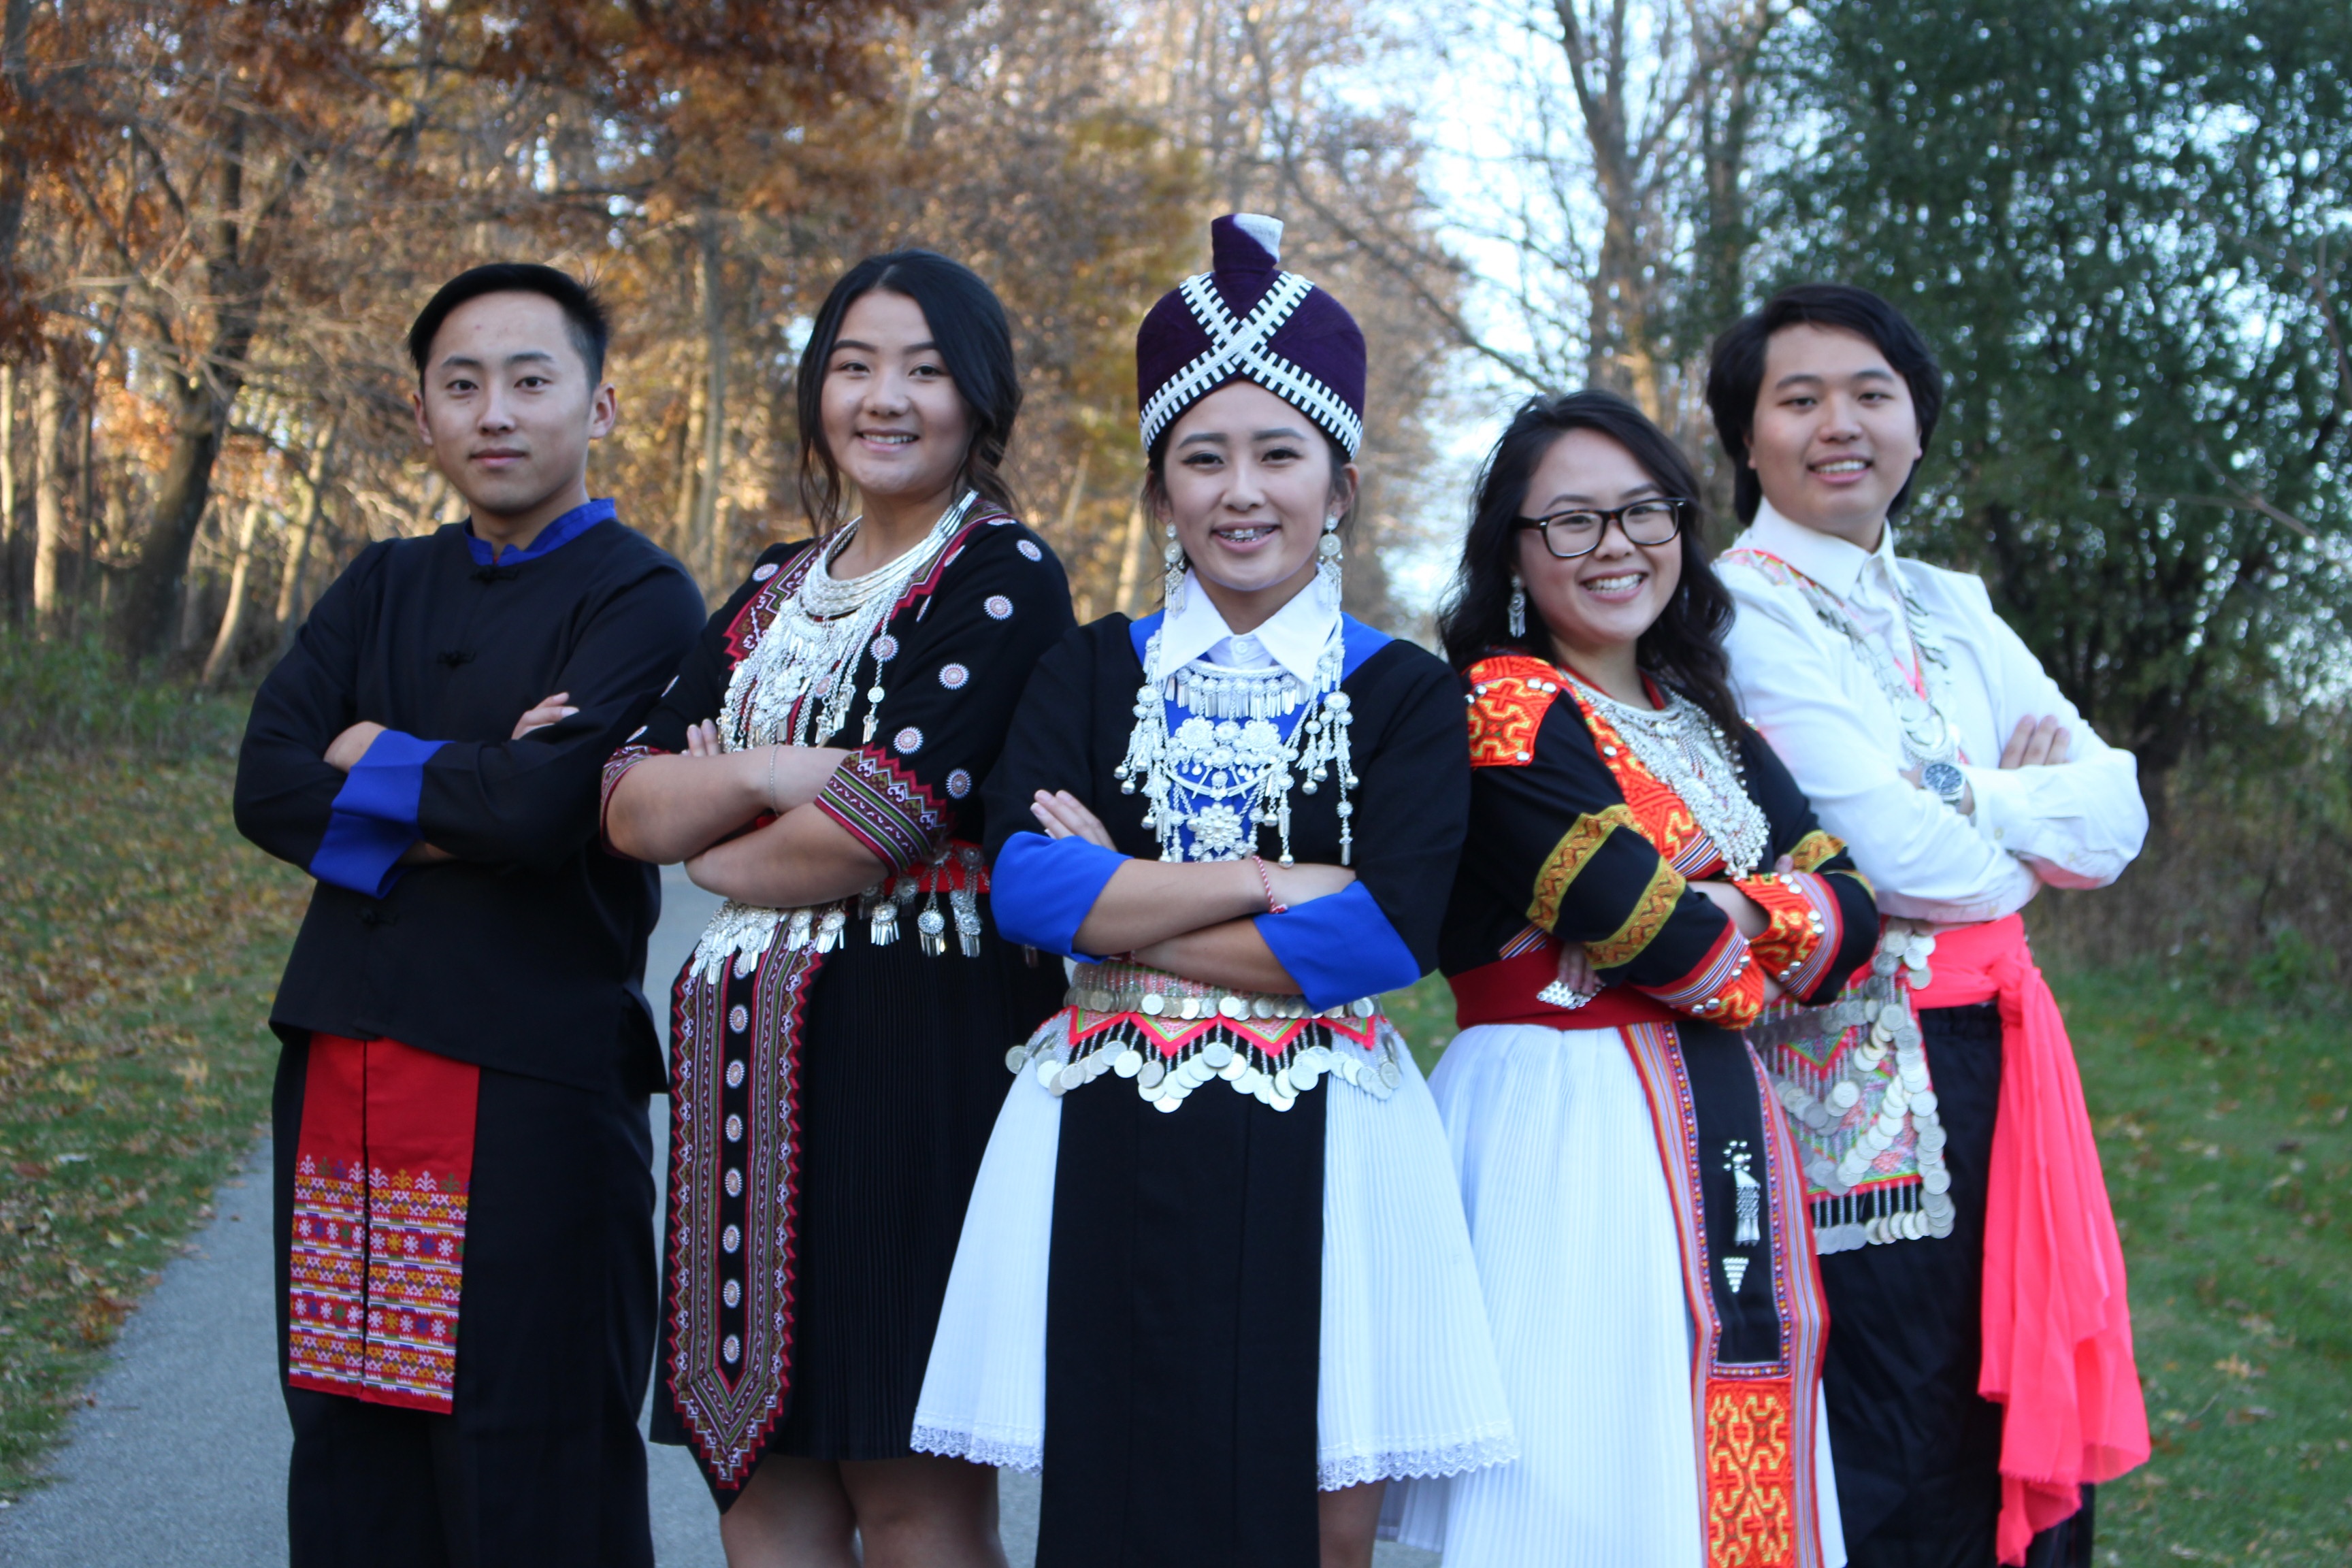 Hmong students in traditional dress